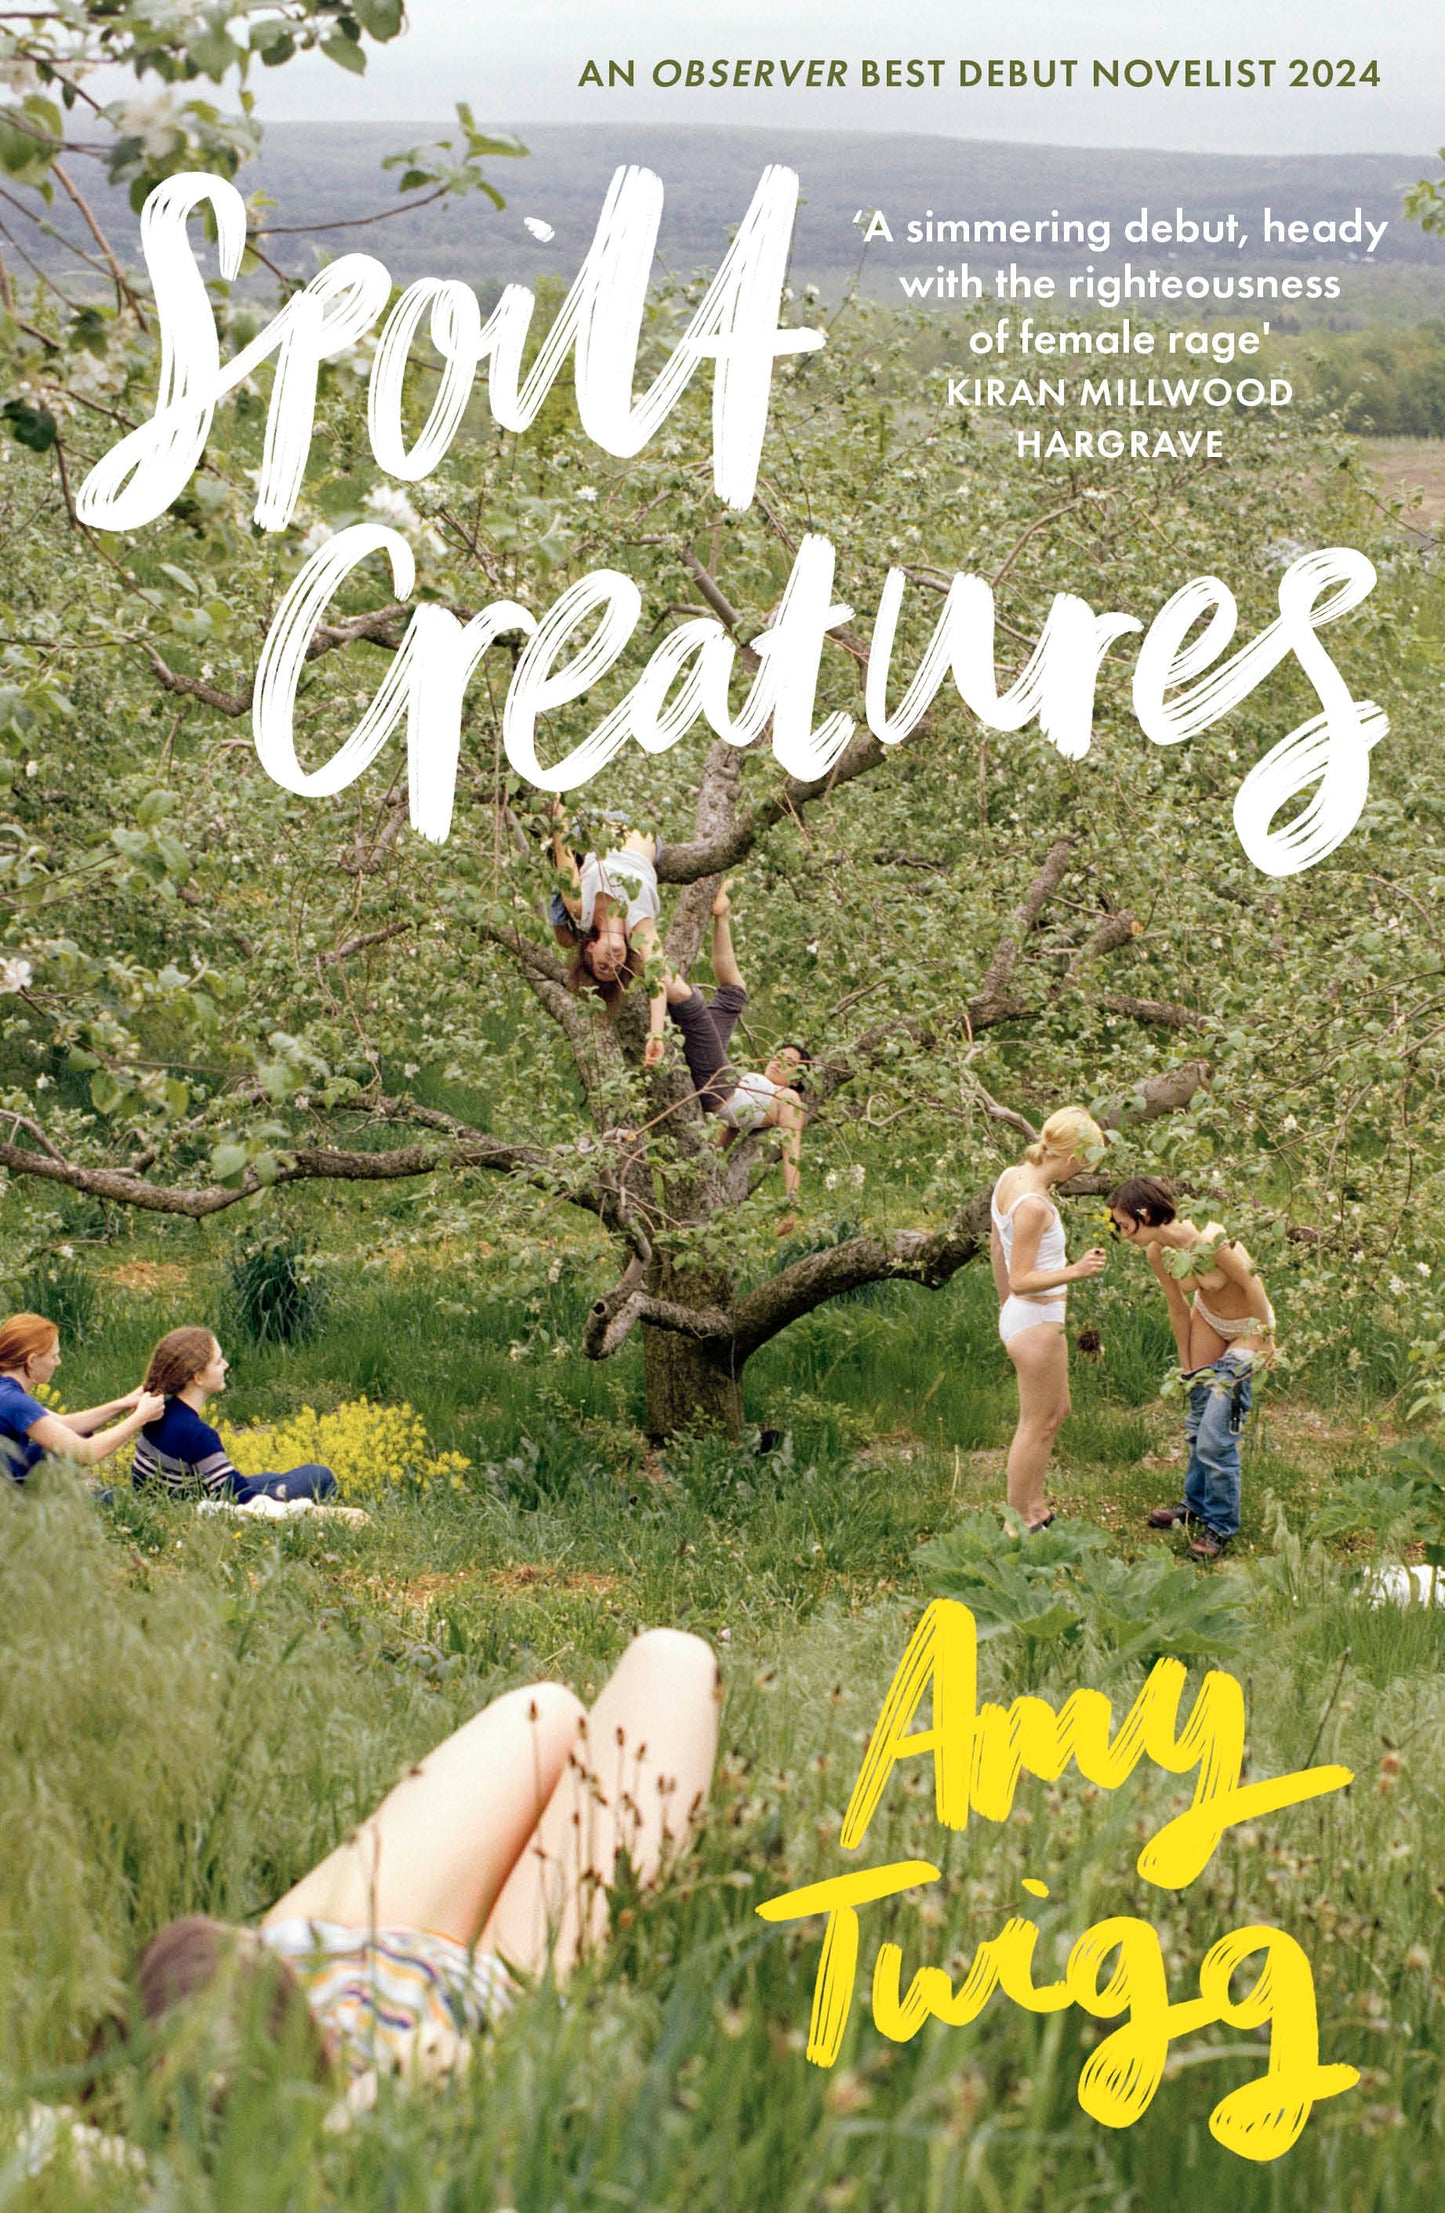 PRE-ORDER: Spoilt Creatures - Amy Twigg